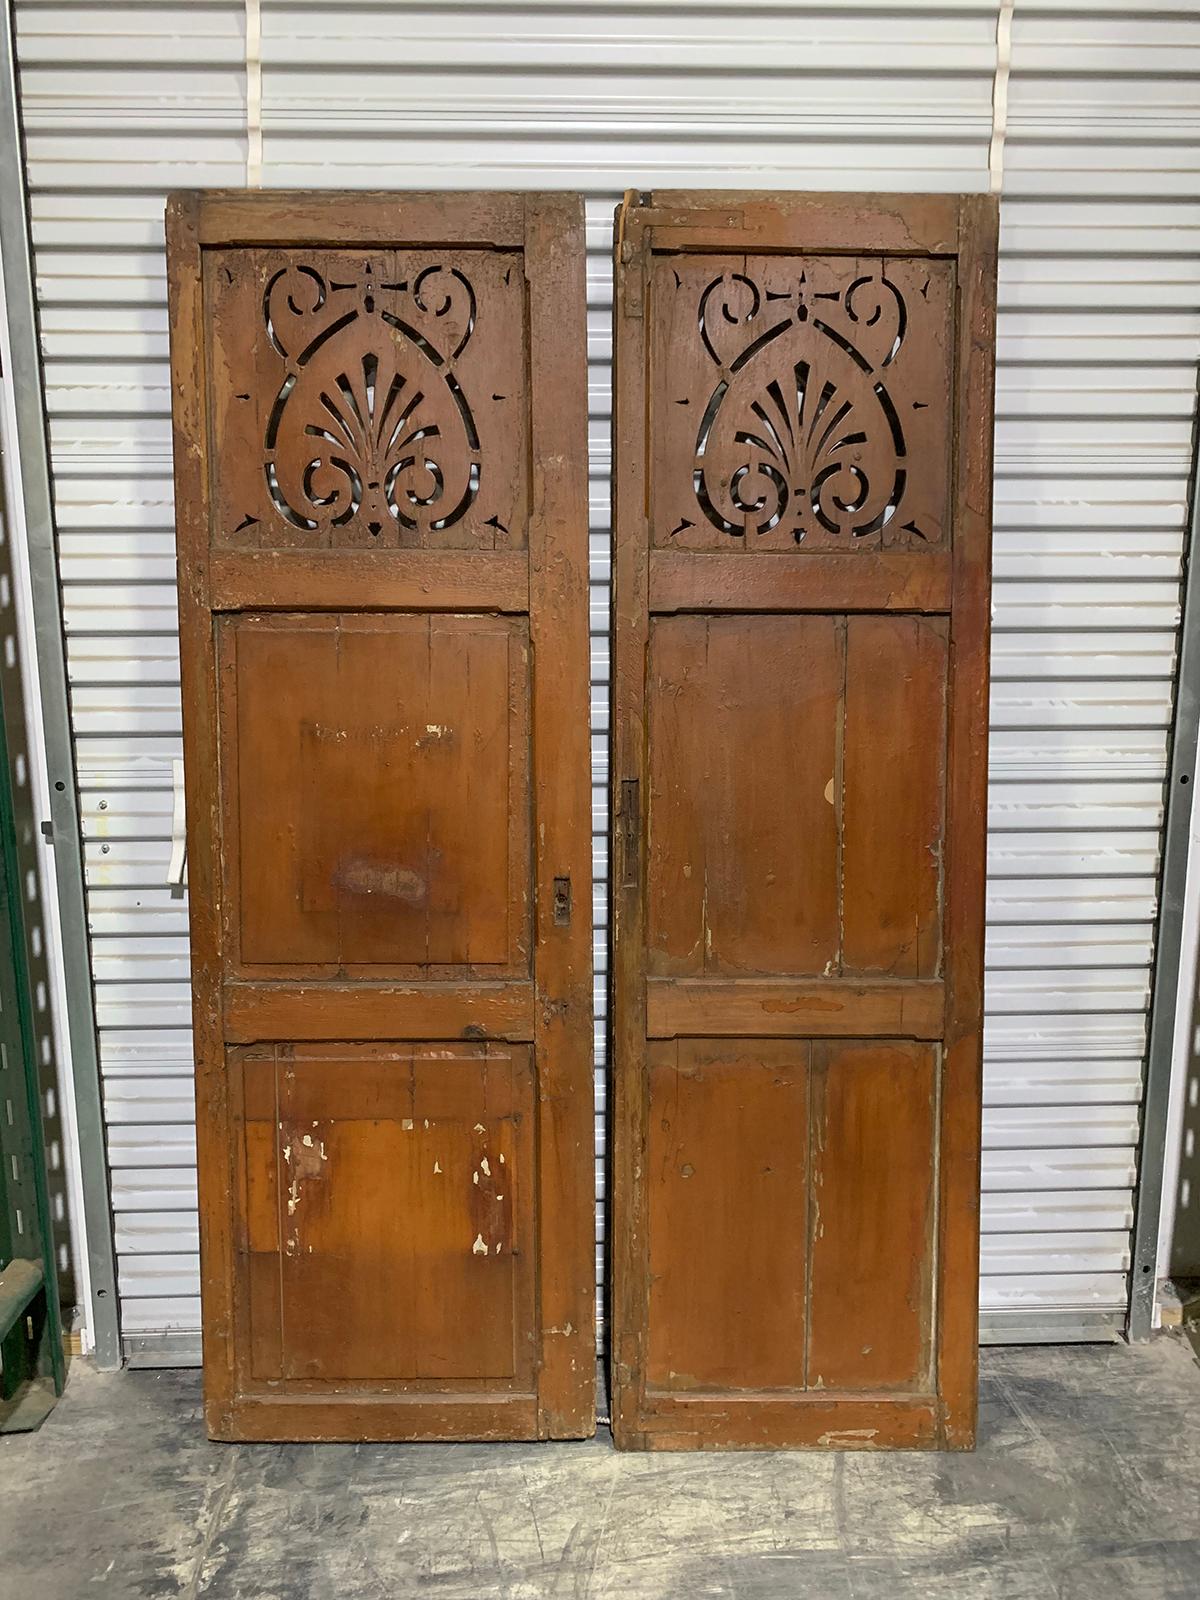 Pair of 19th-20th century American painted shutters with pierced top panel.